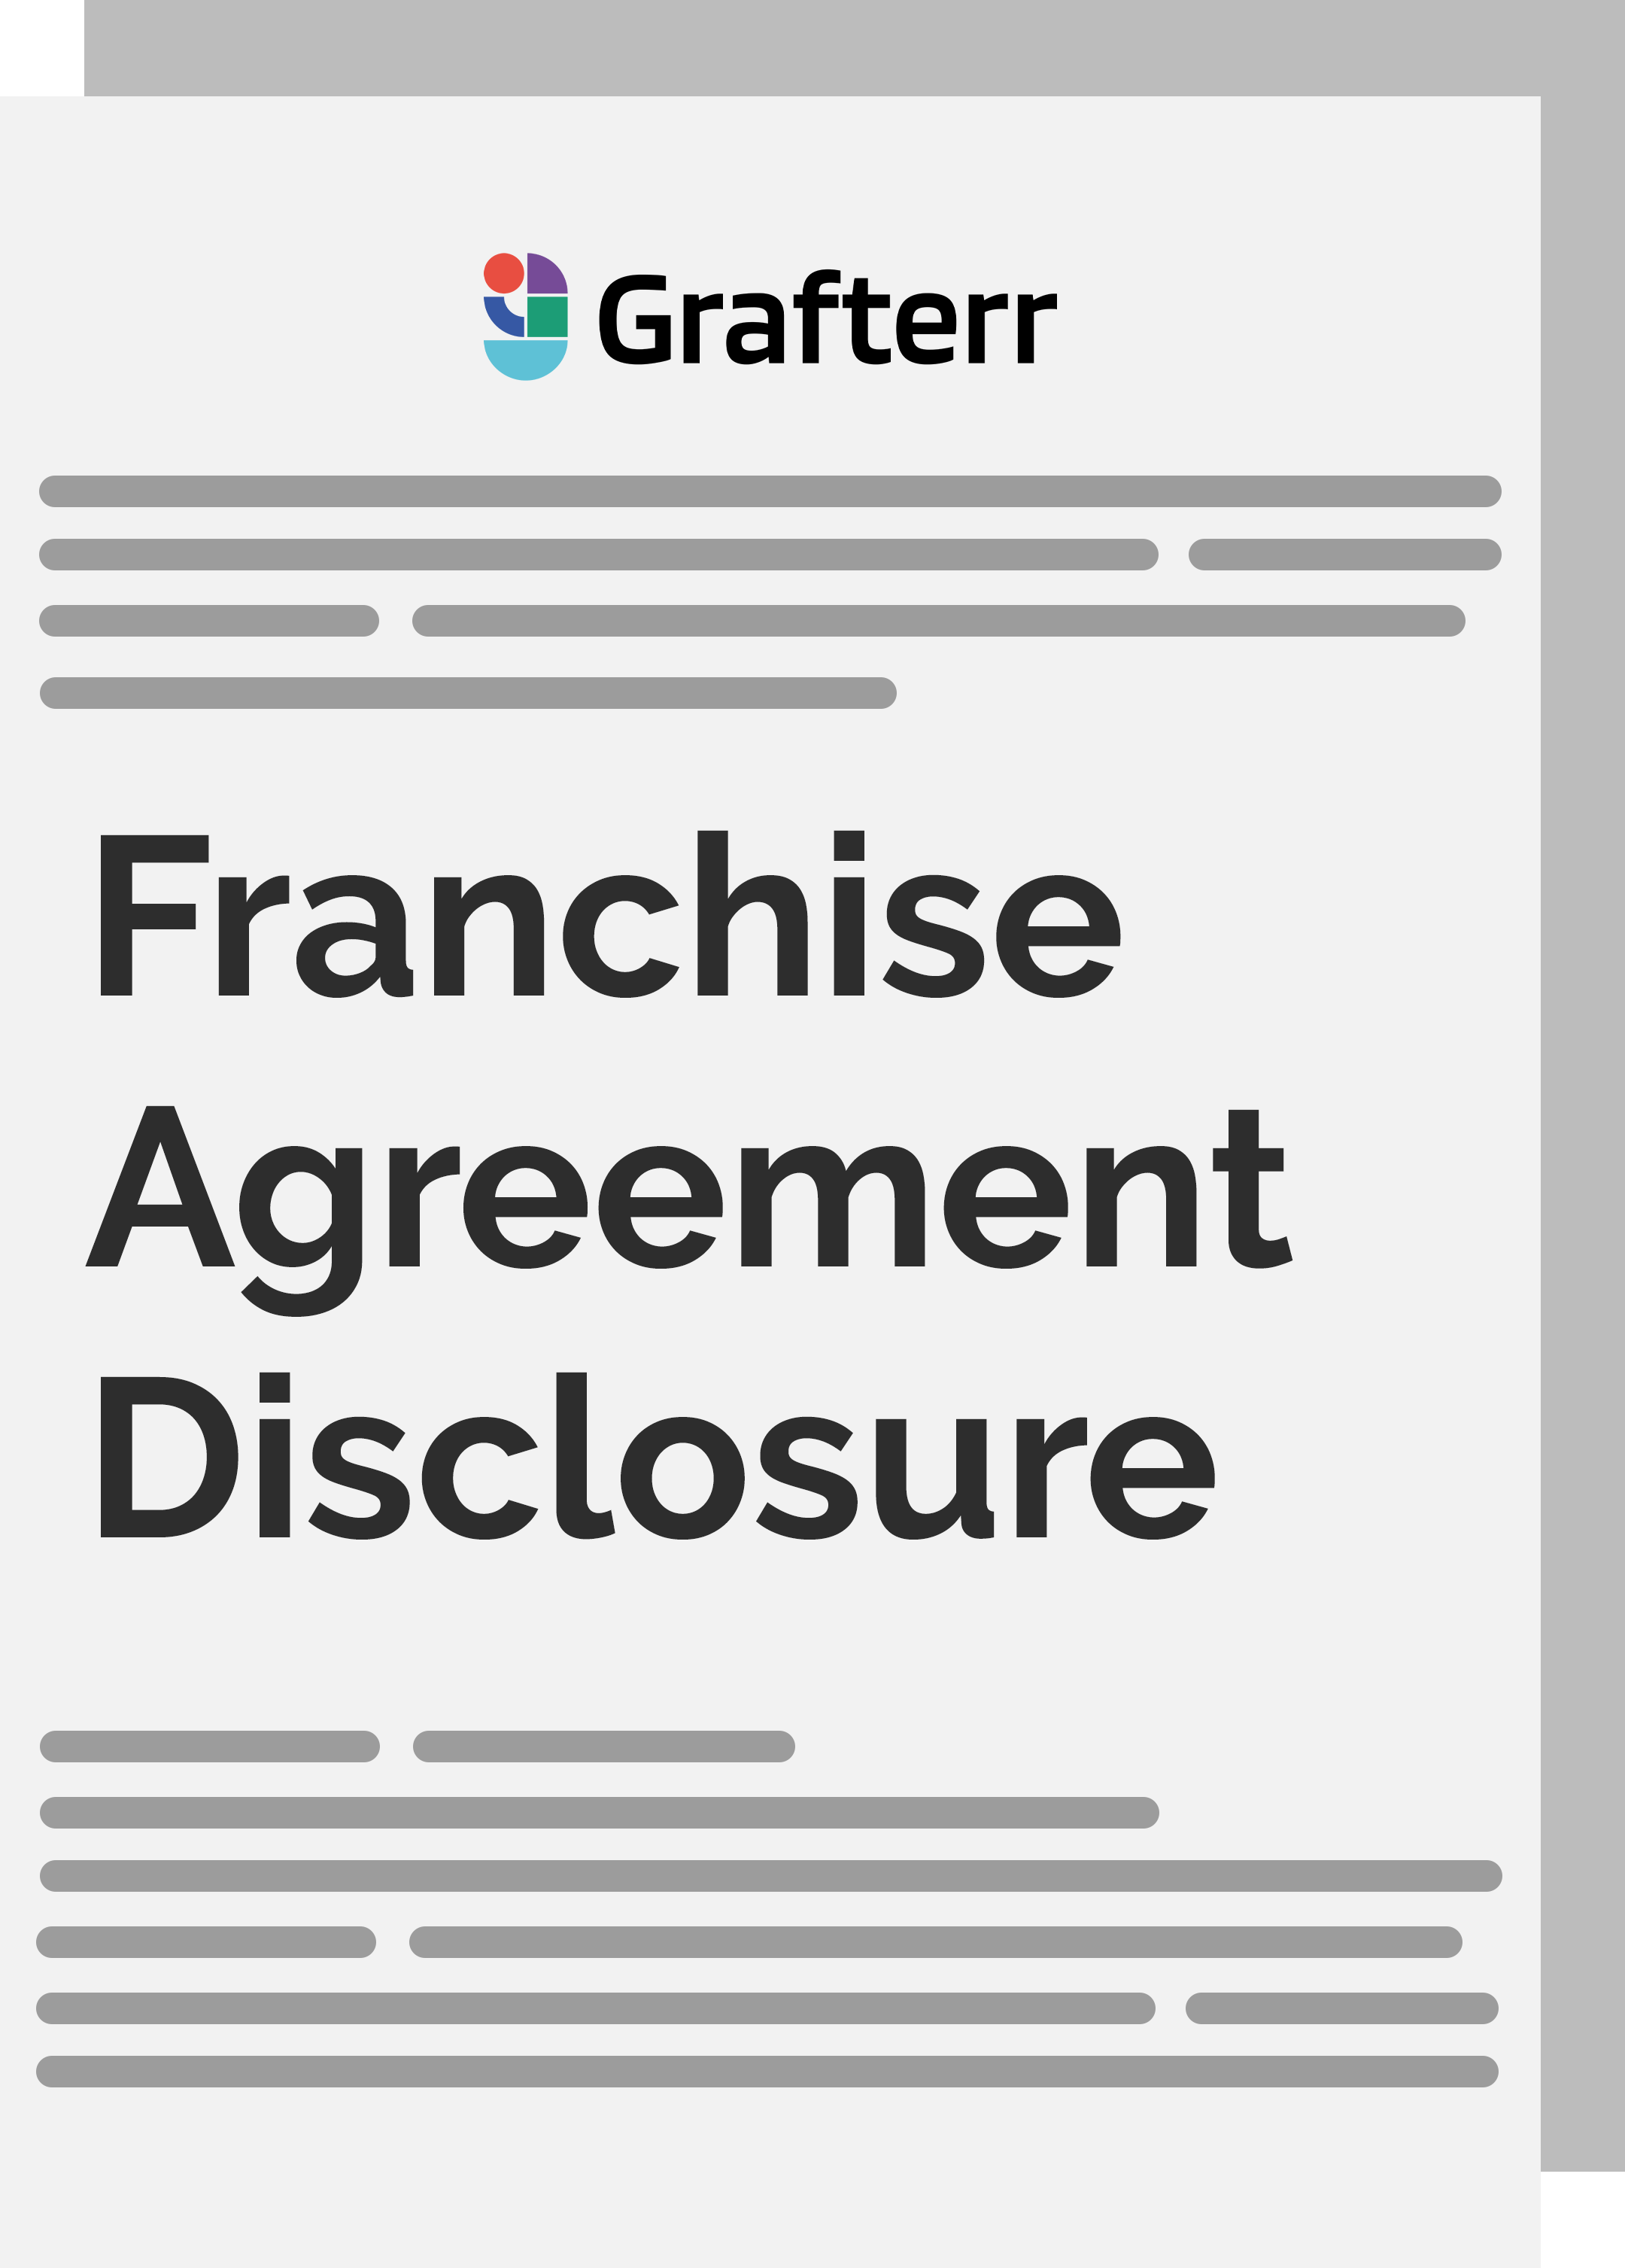 Franchise Agreement Disclosure Document | Grafterr